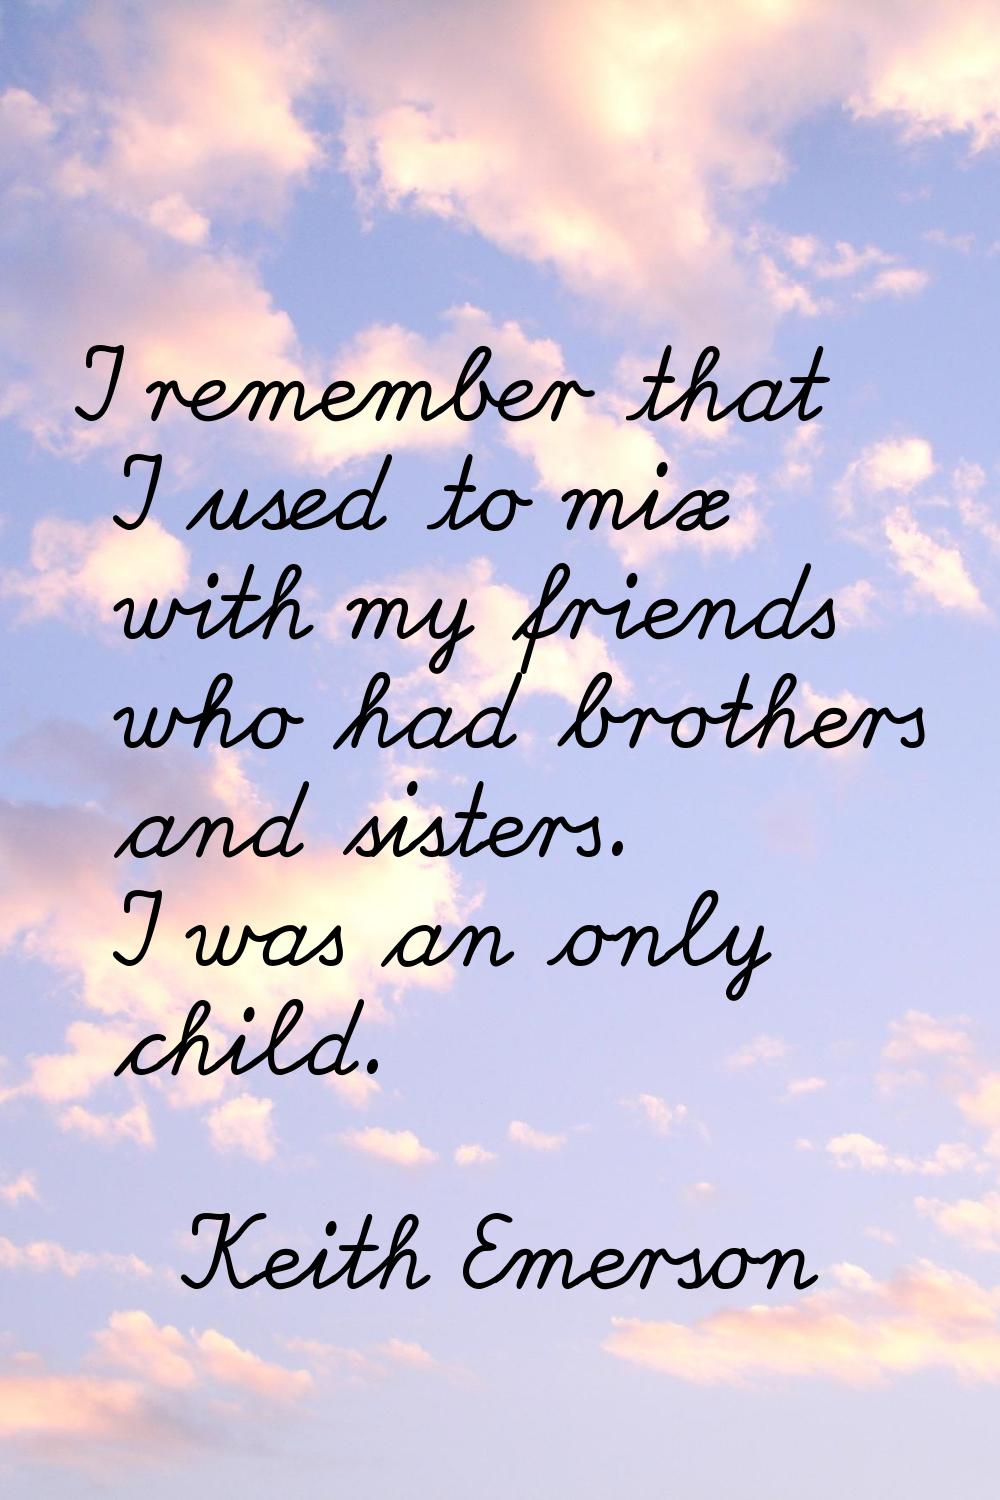 I remember that I used to mix with my friends who had brothers and sisters. I was an only child.